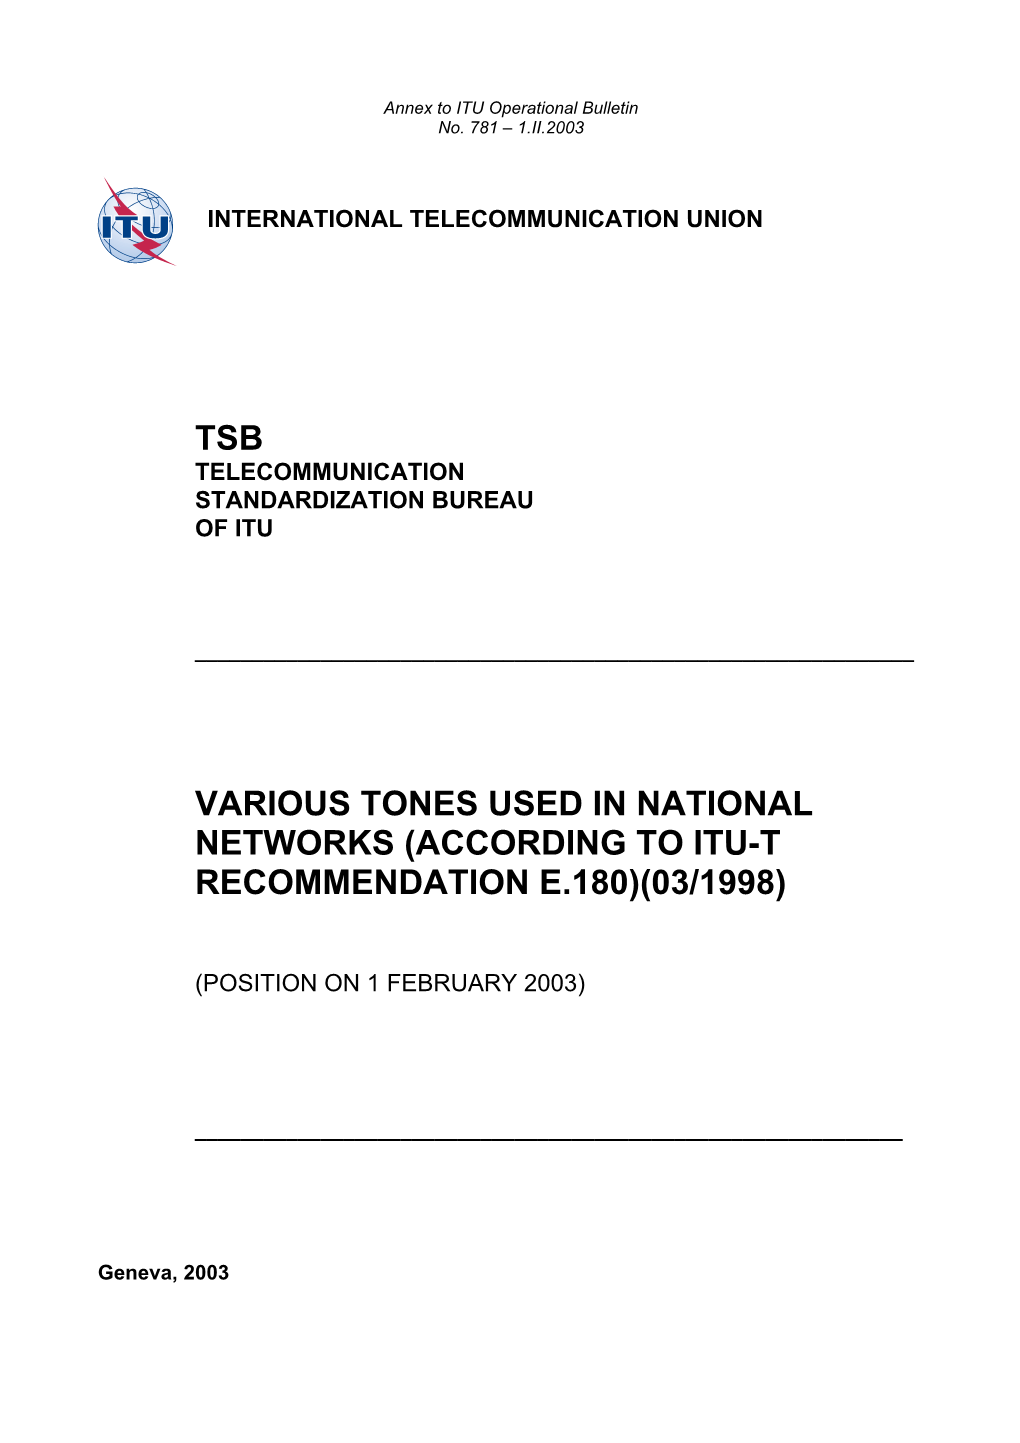 Tones Used in National Networks (According to Itu-T Recommendation E.180)(03/1998)